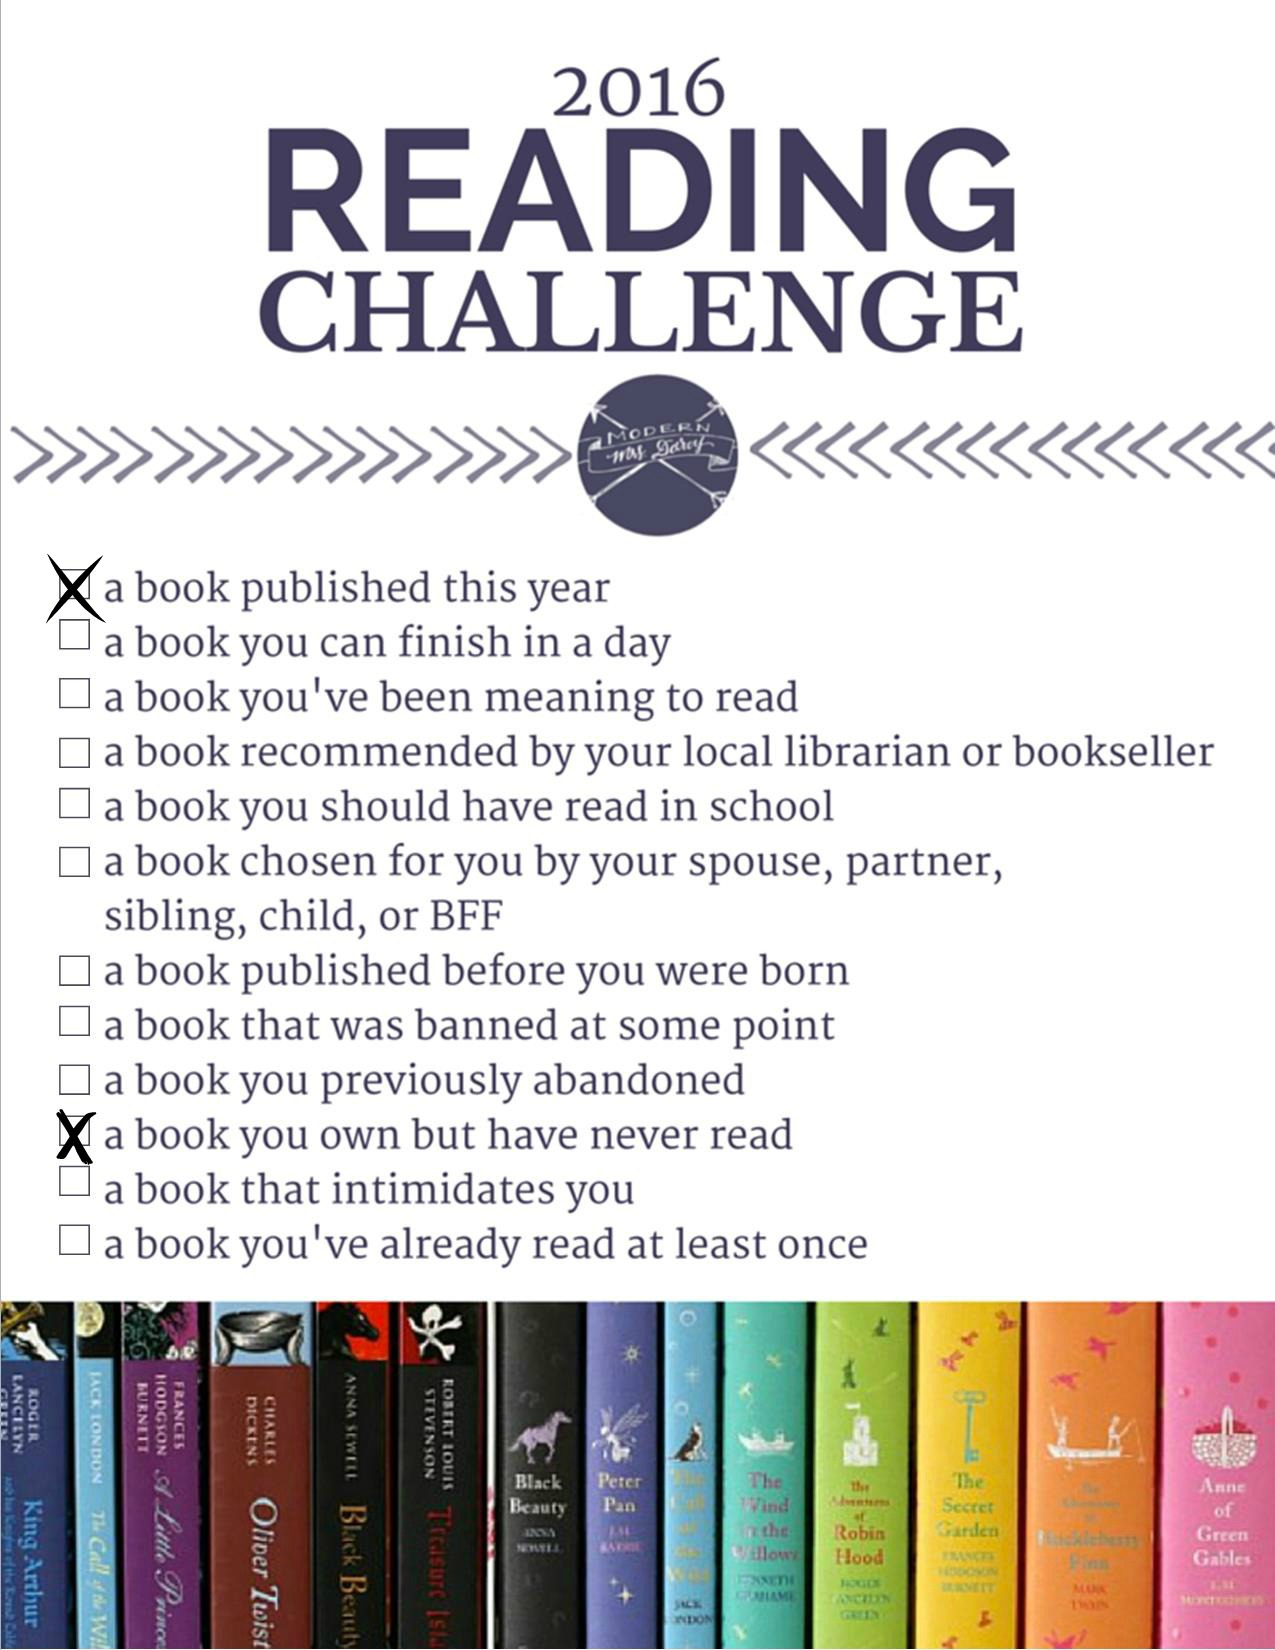 Laura’s Reading Challenge – A book published this year